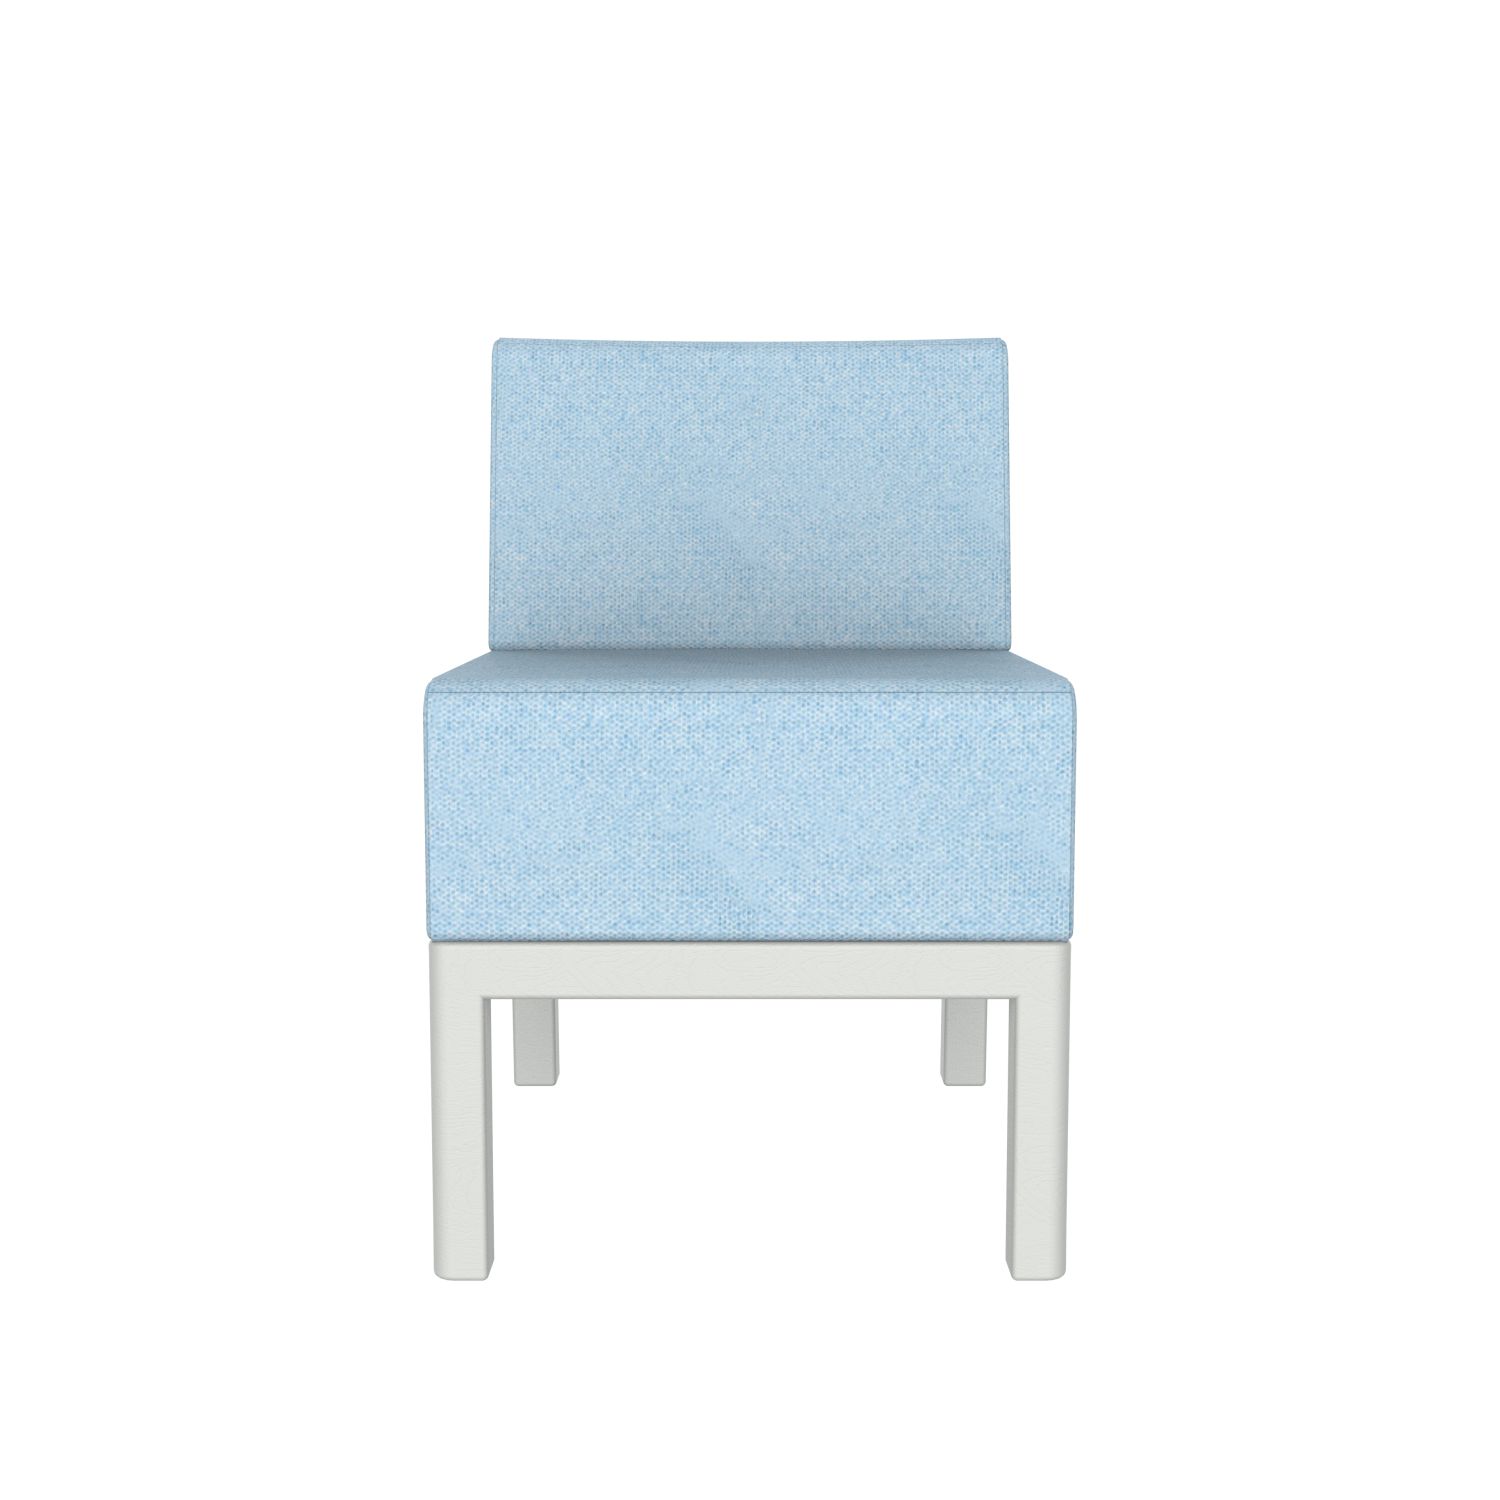 lensvelt piet boon chair 01 without armrests moss pastel blue 40 price level 2 light grey ral7035 hard leg ends